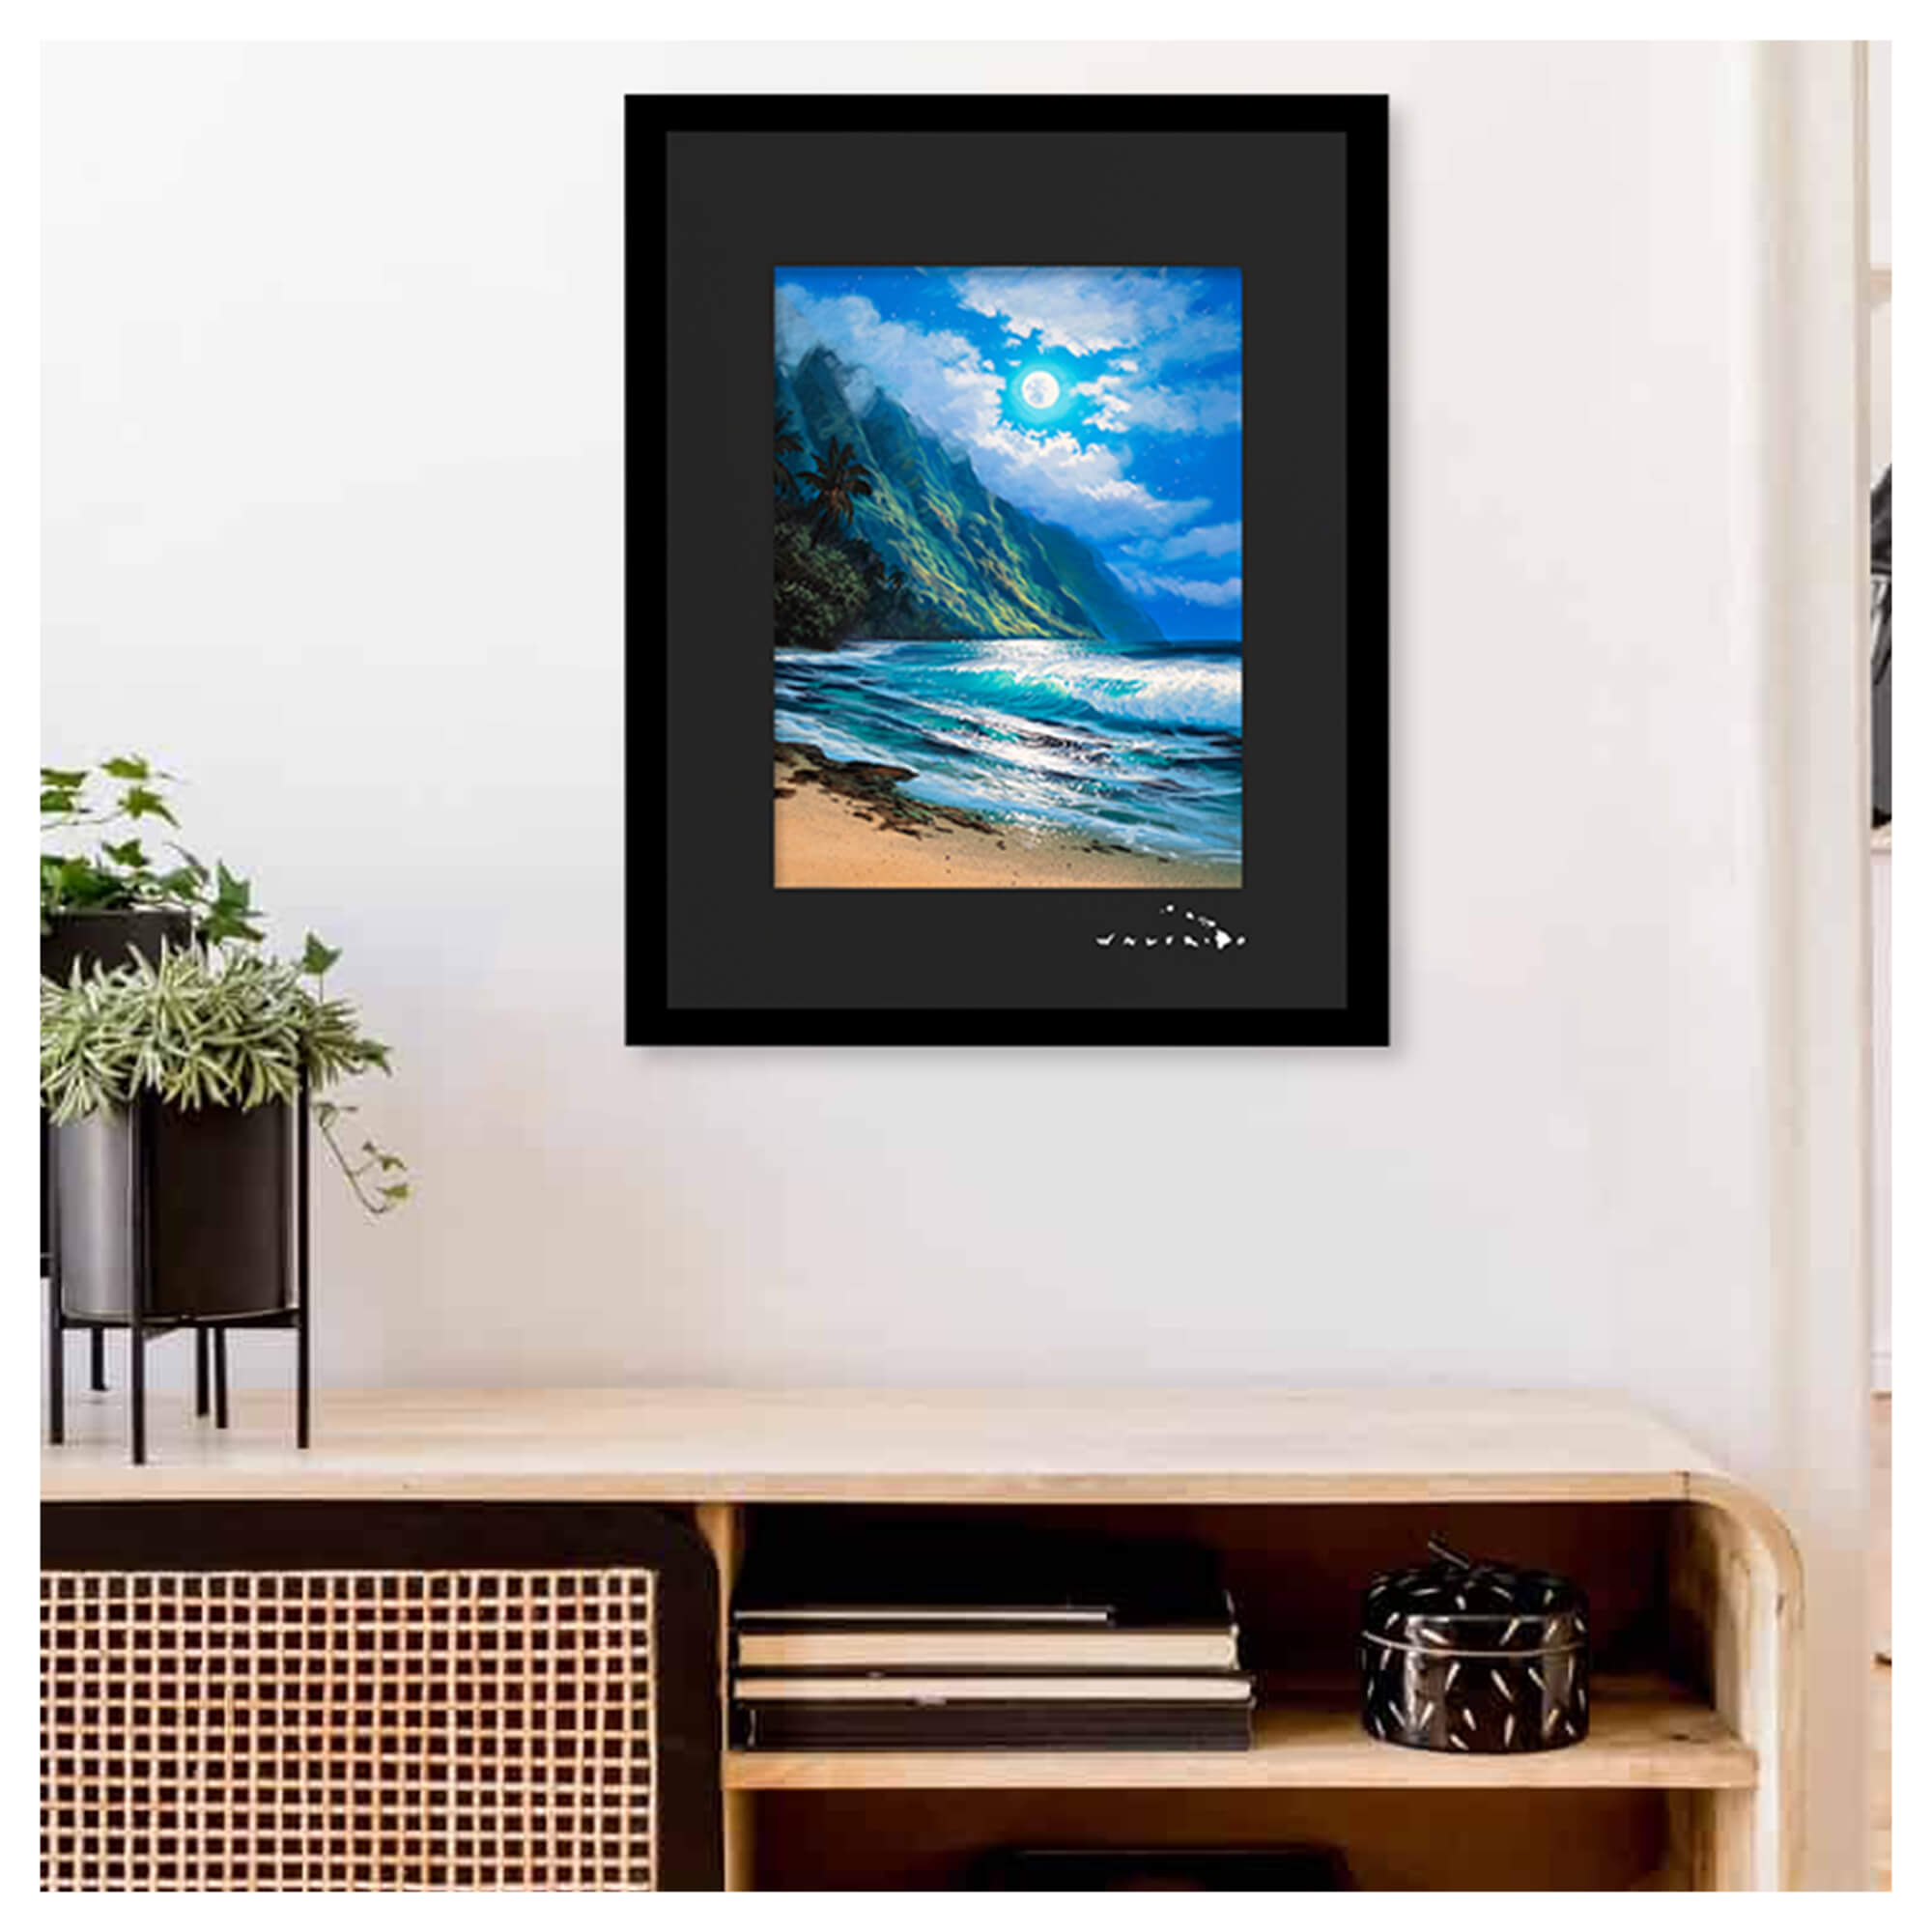 A framed matted art print depicting a moonlit seascape surrounded by dramatic mountains by Hawaii artist Walfrido Garcia